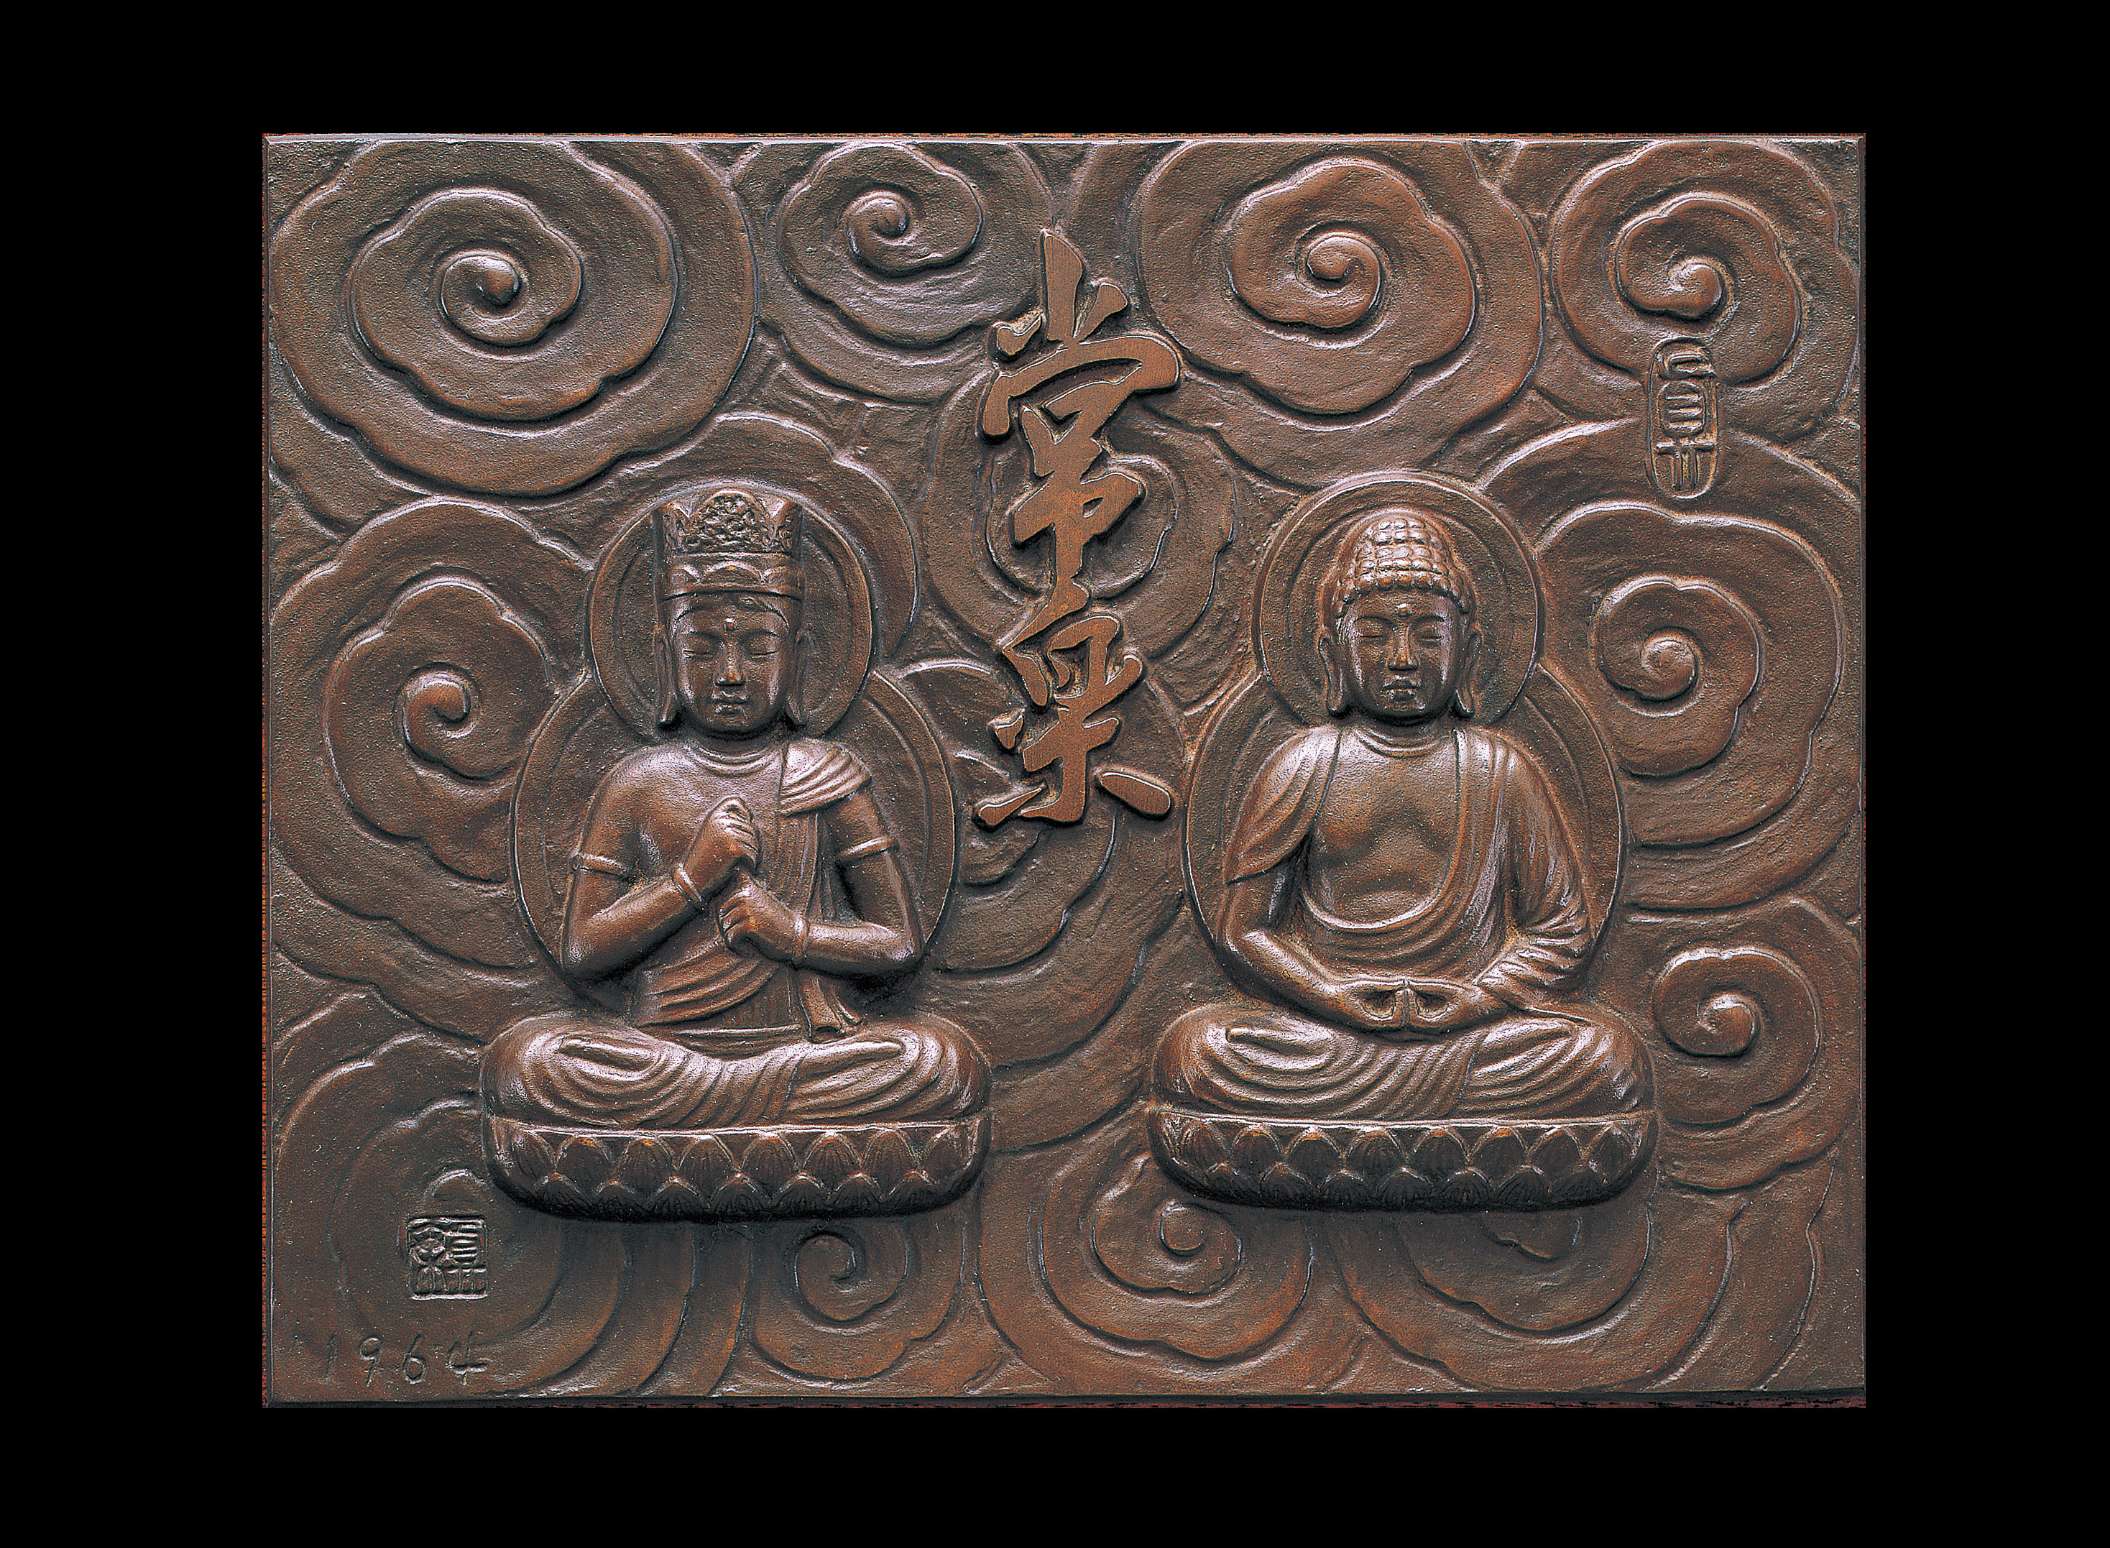 A rectangular dark, metallic relief of two buddhas sitting cross-legged side by side atop lotus seats with raised Japanese calligraphy between them; swirling, stylized clouds form the background.